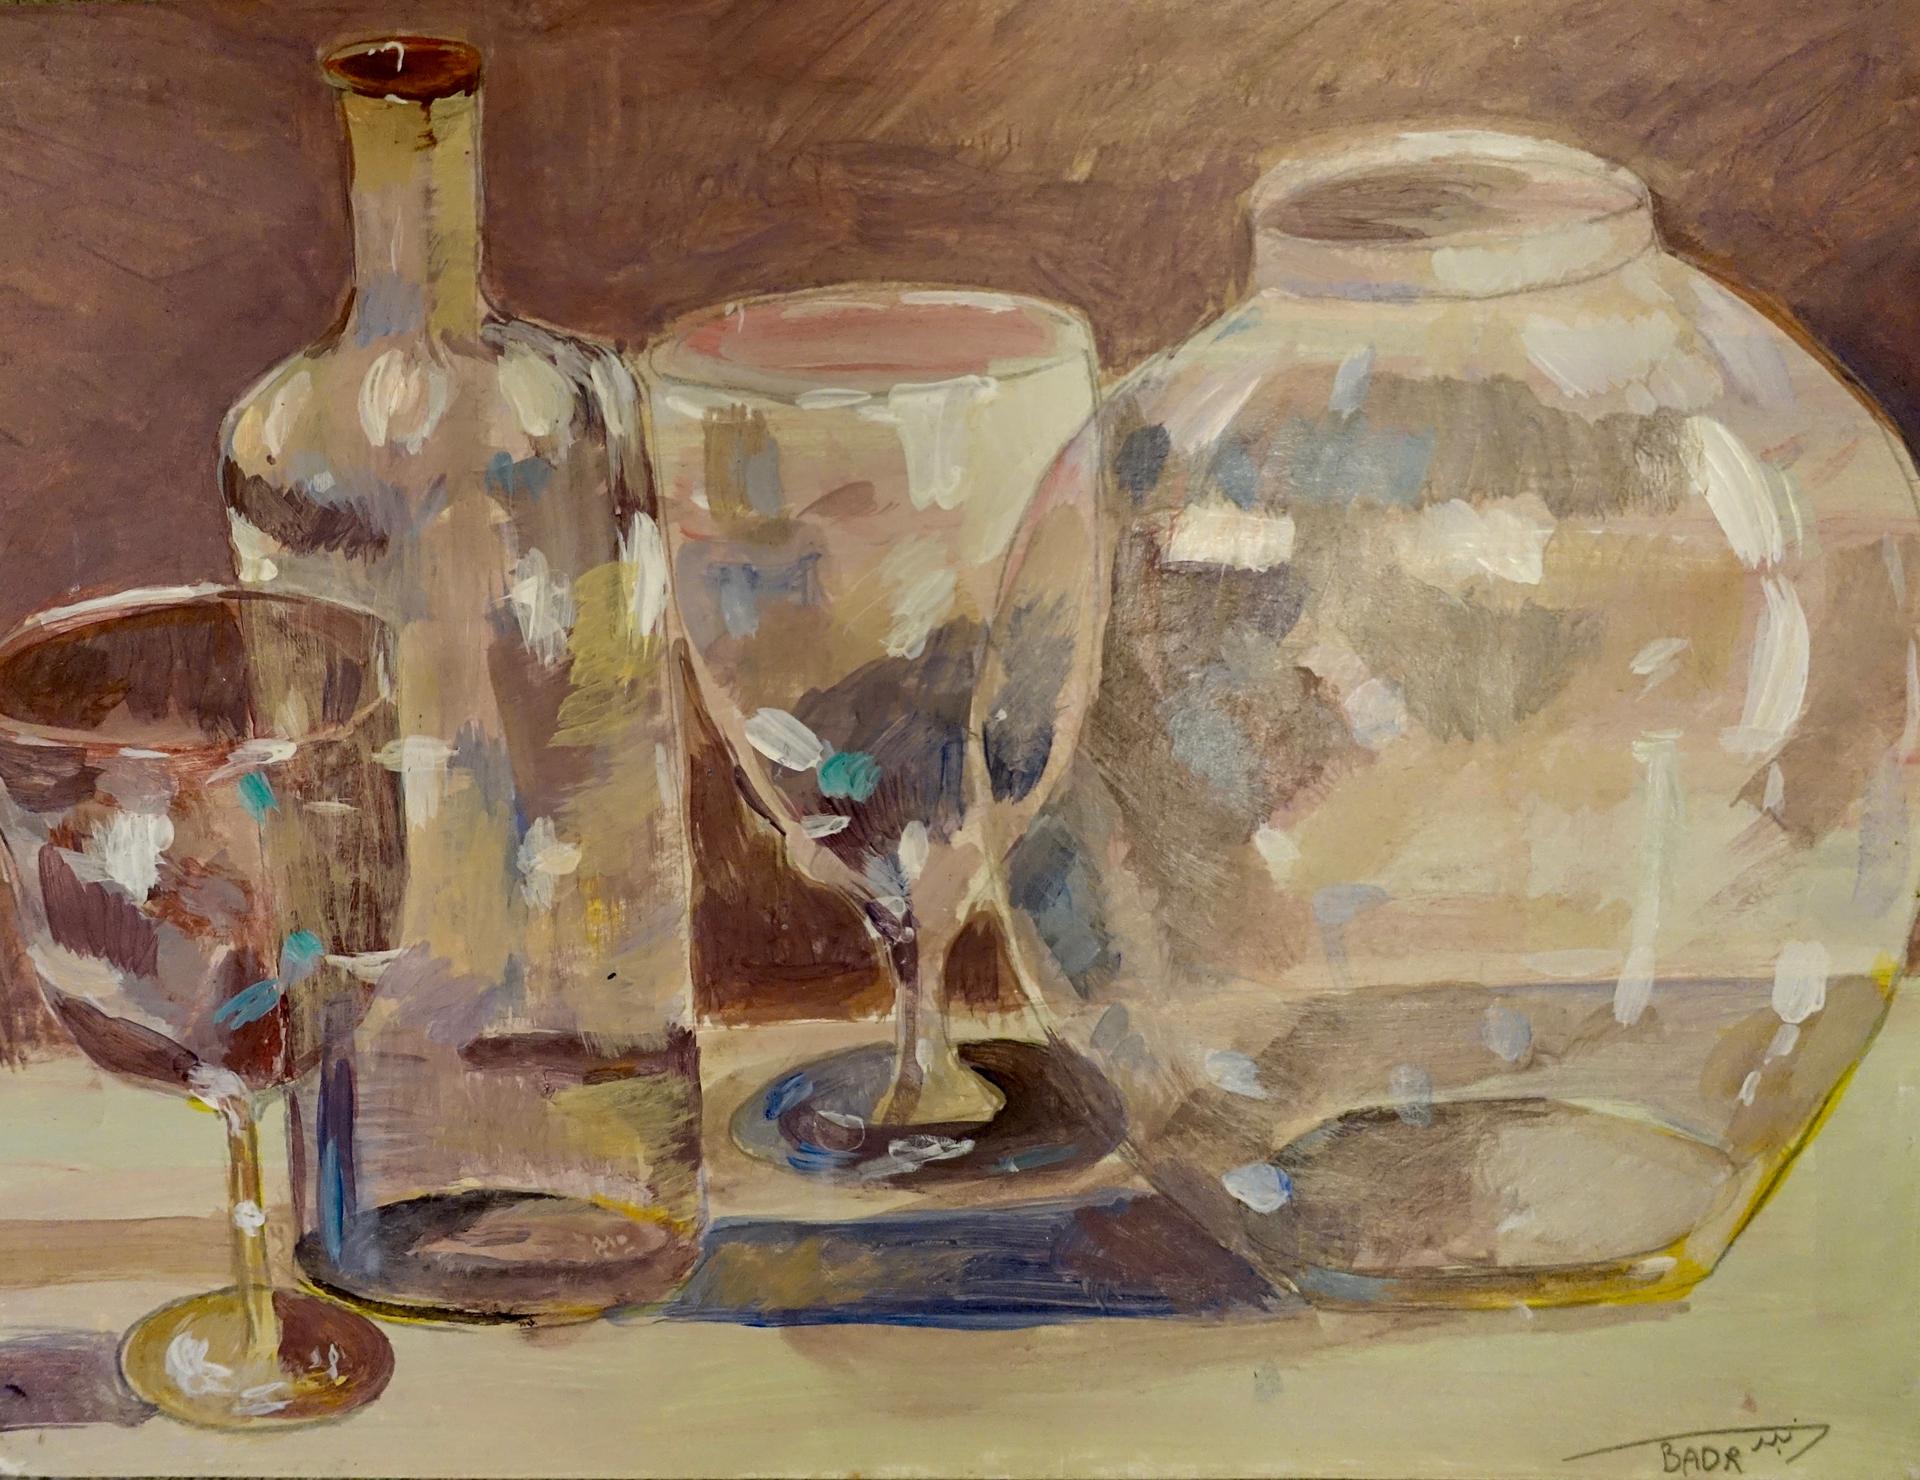 Untitled (Still Life of Glassware), work on paper by Ahmed Rabbani.